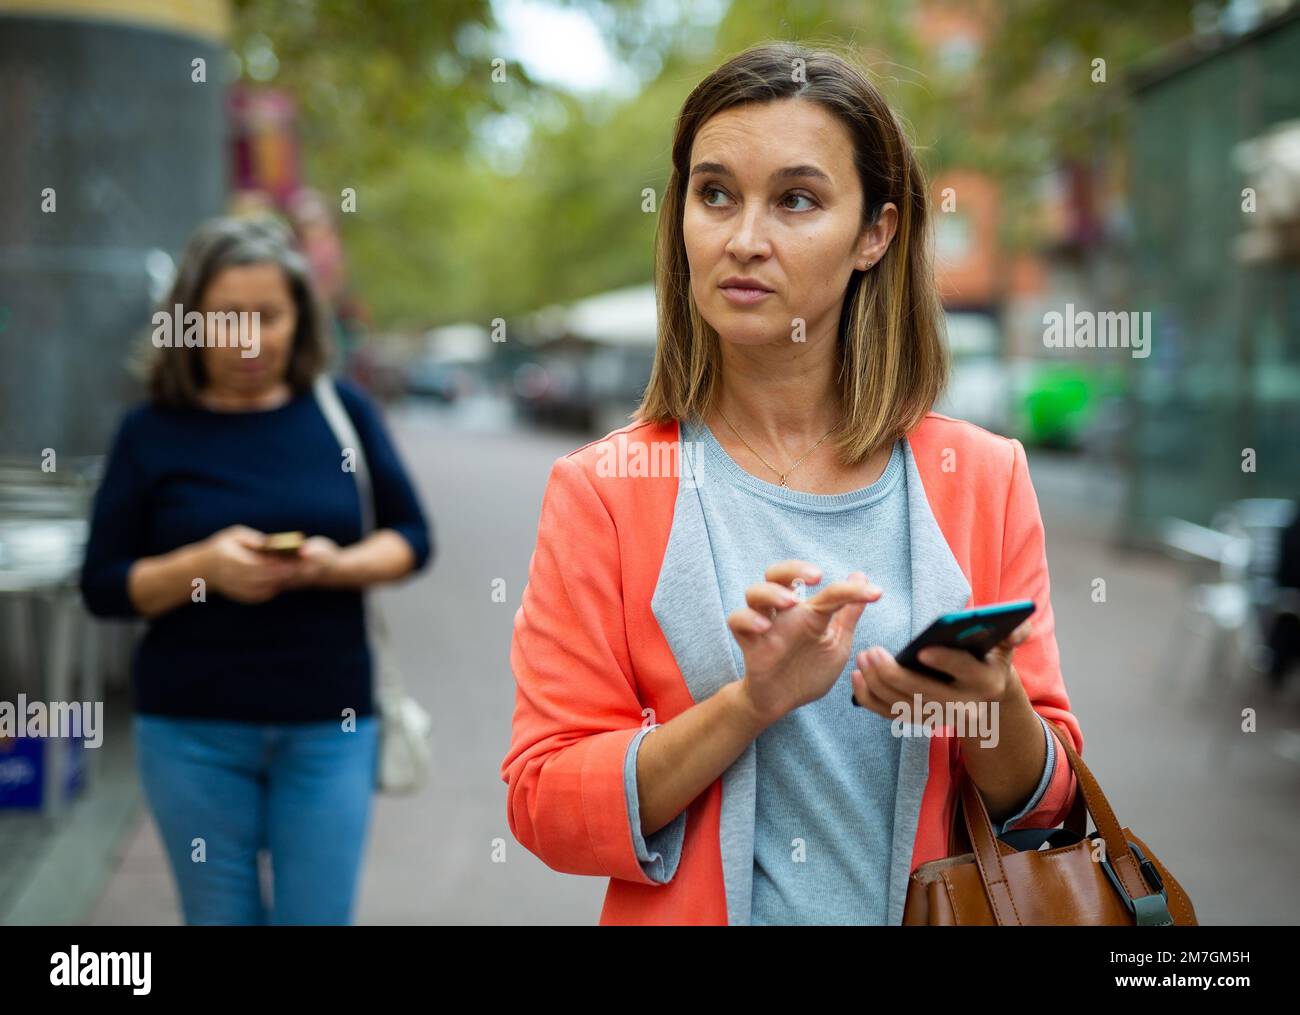 Focused young business woman using smartphone while walking outoors Stock Photo